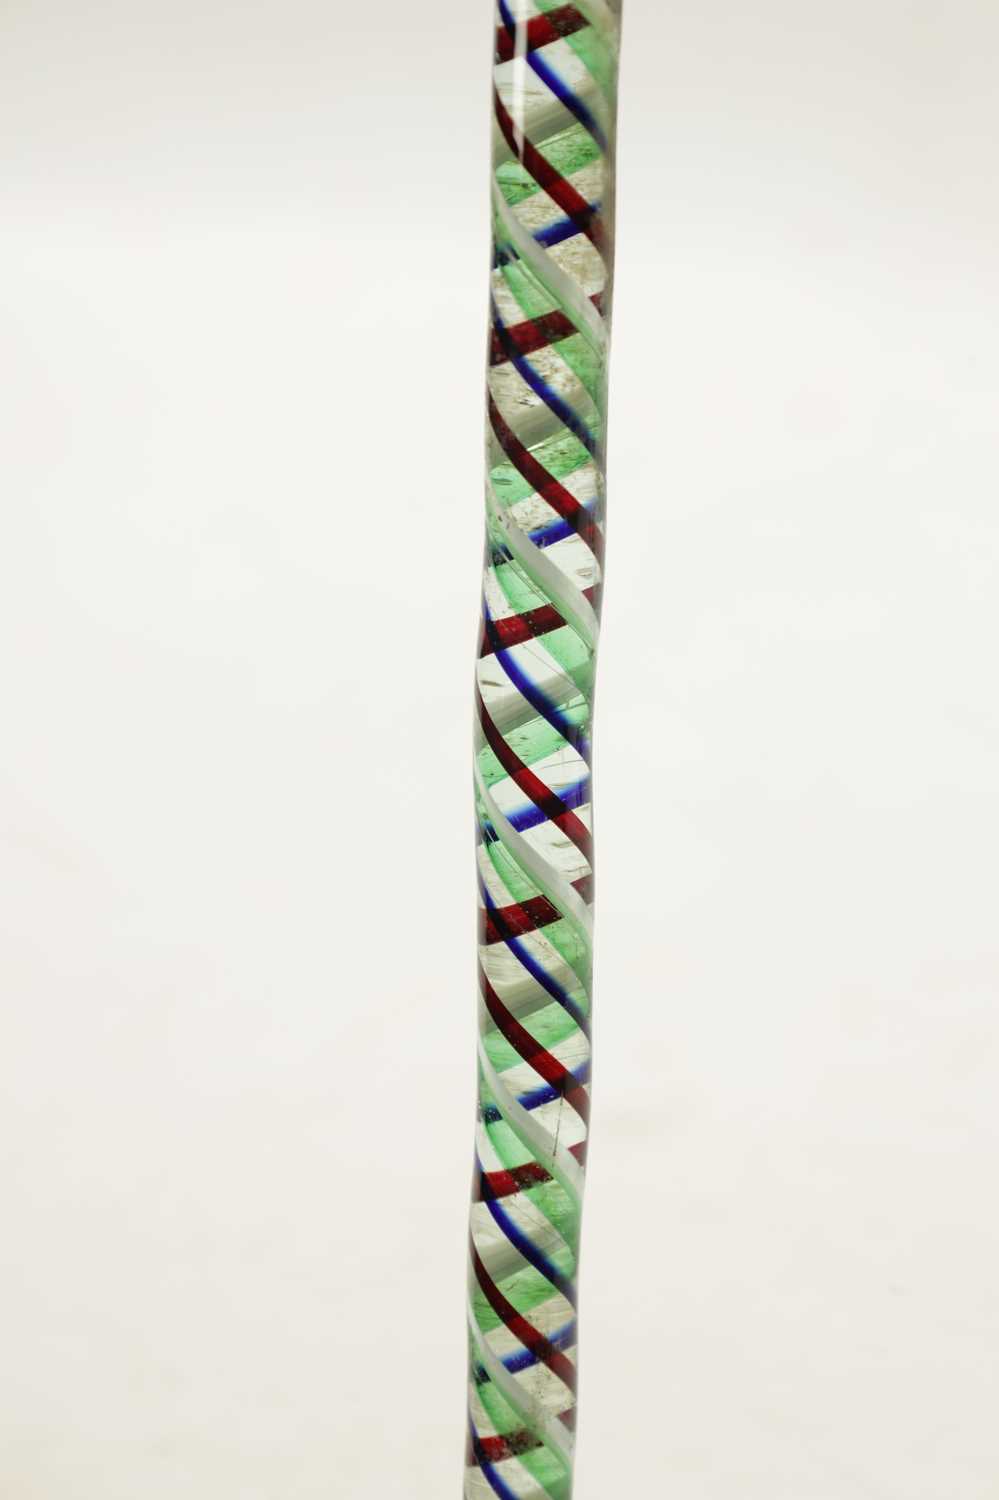 A LATE 19TH CENTURY GLASS WALKING STICK - Image 2 of 4